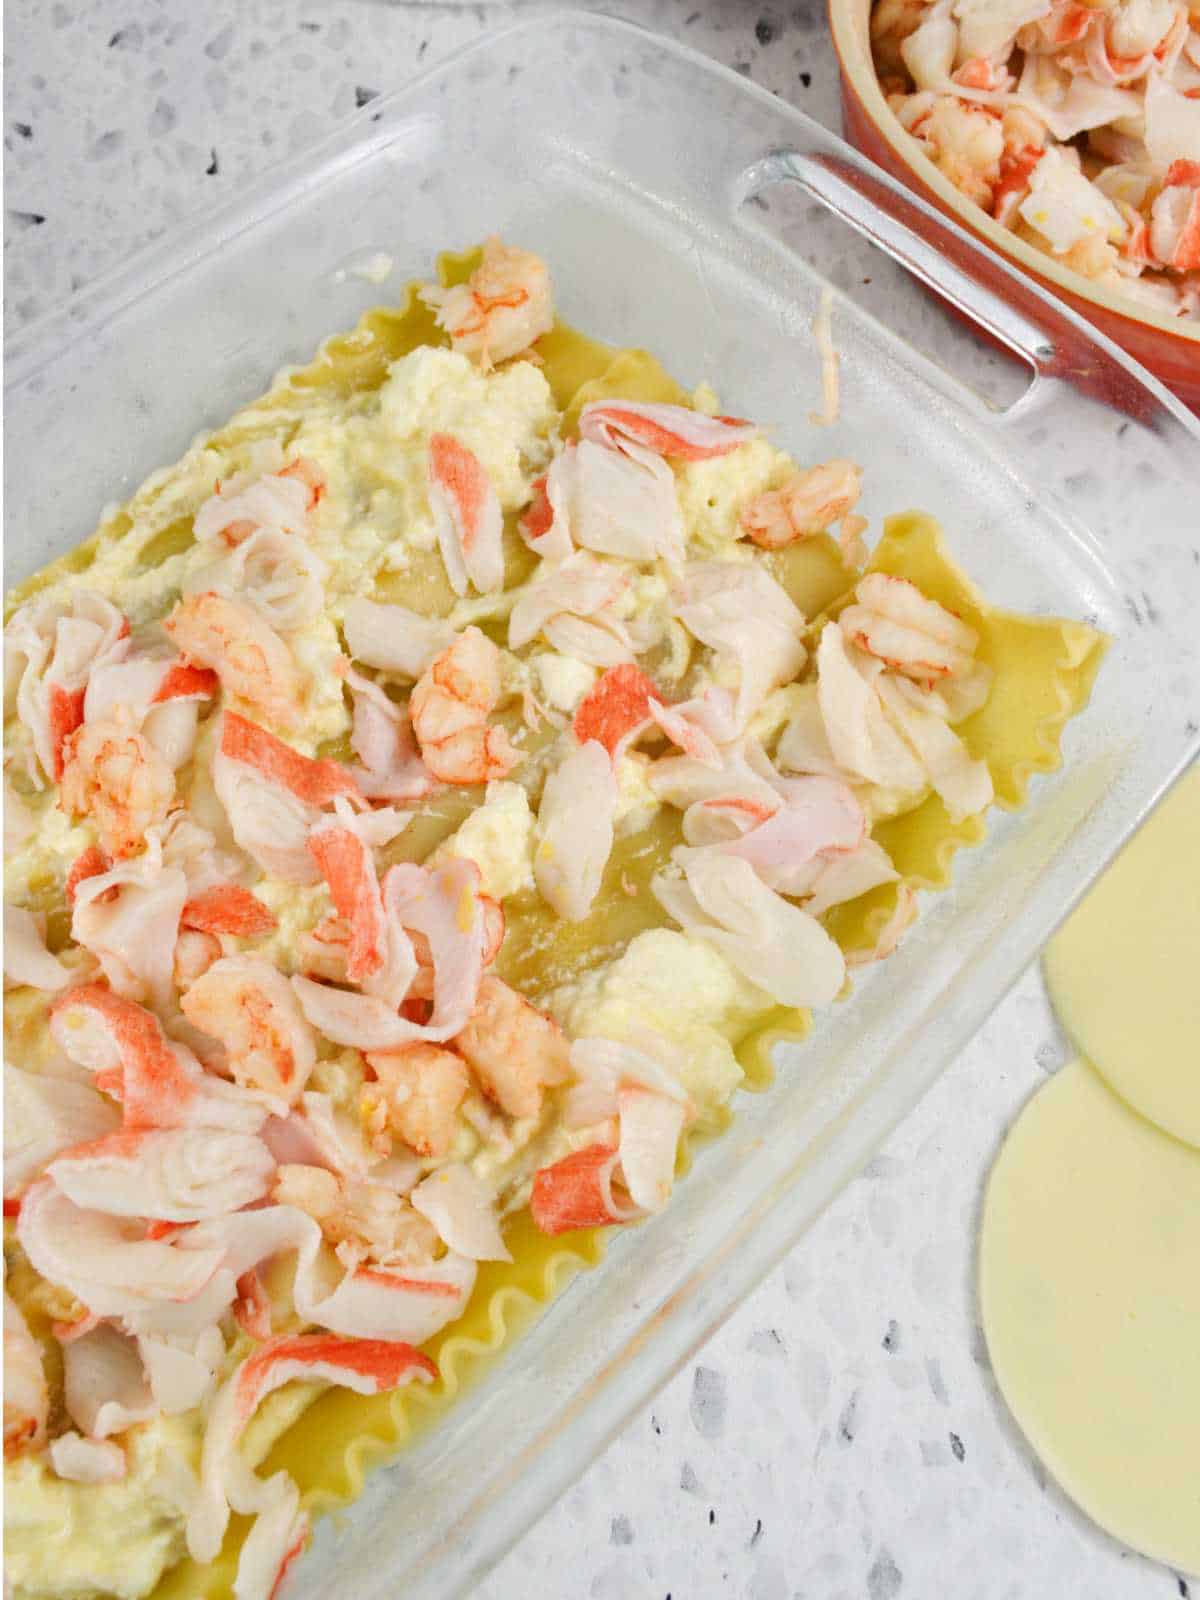 layers of pasta ribbon, bechamel sauce, crab, and shrimp in a casserole dish.